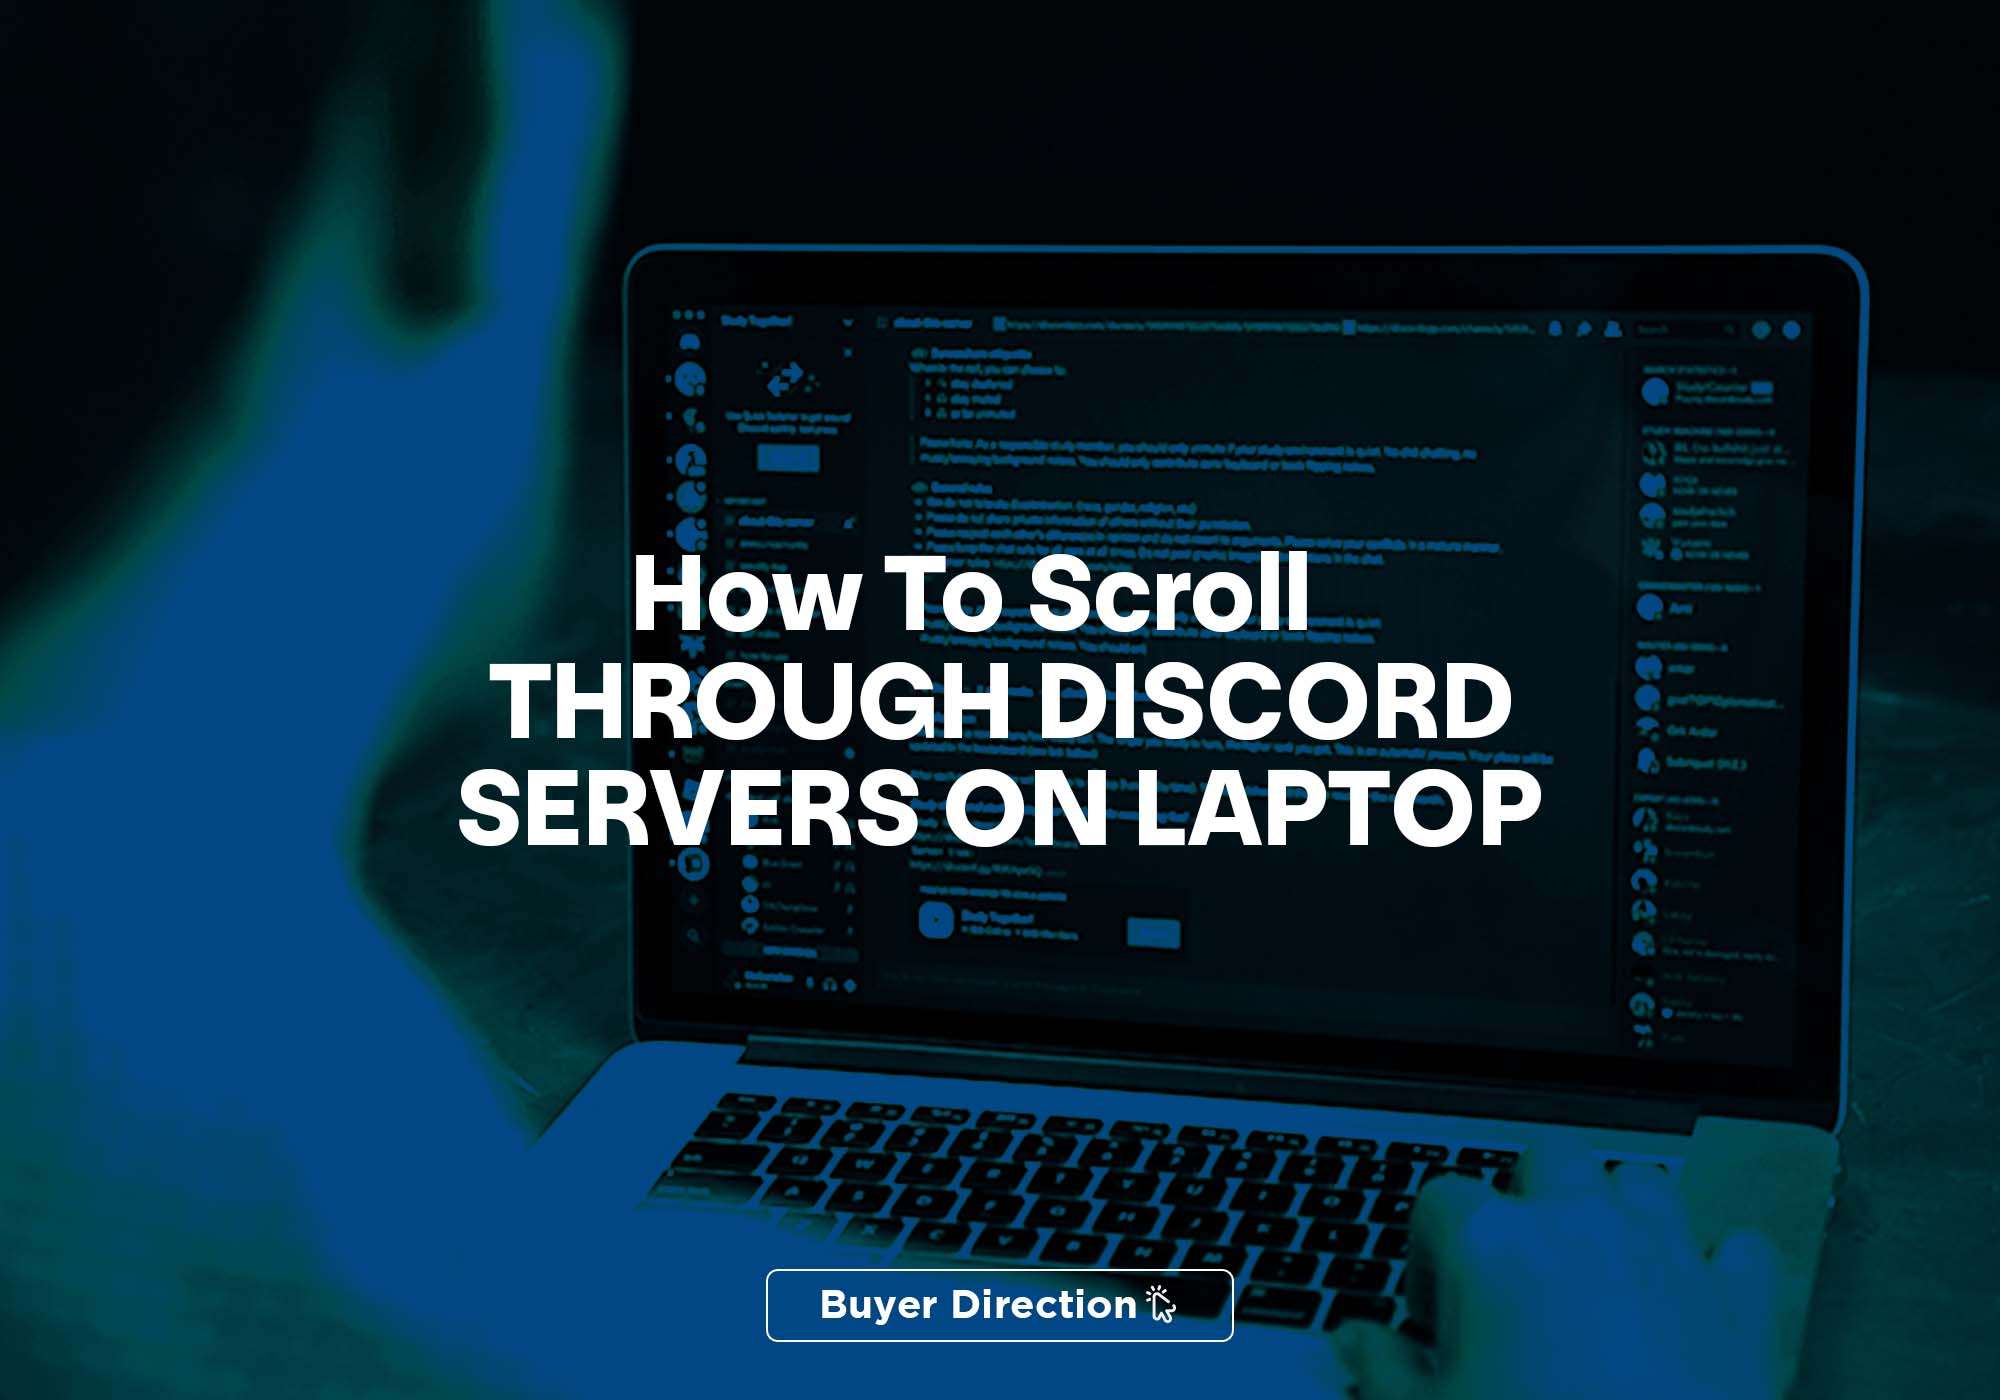 How To Scroll Through Discord Servers On Laptop